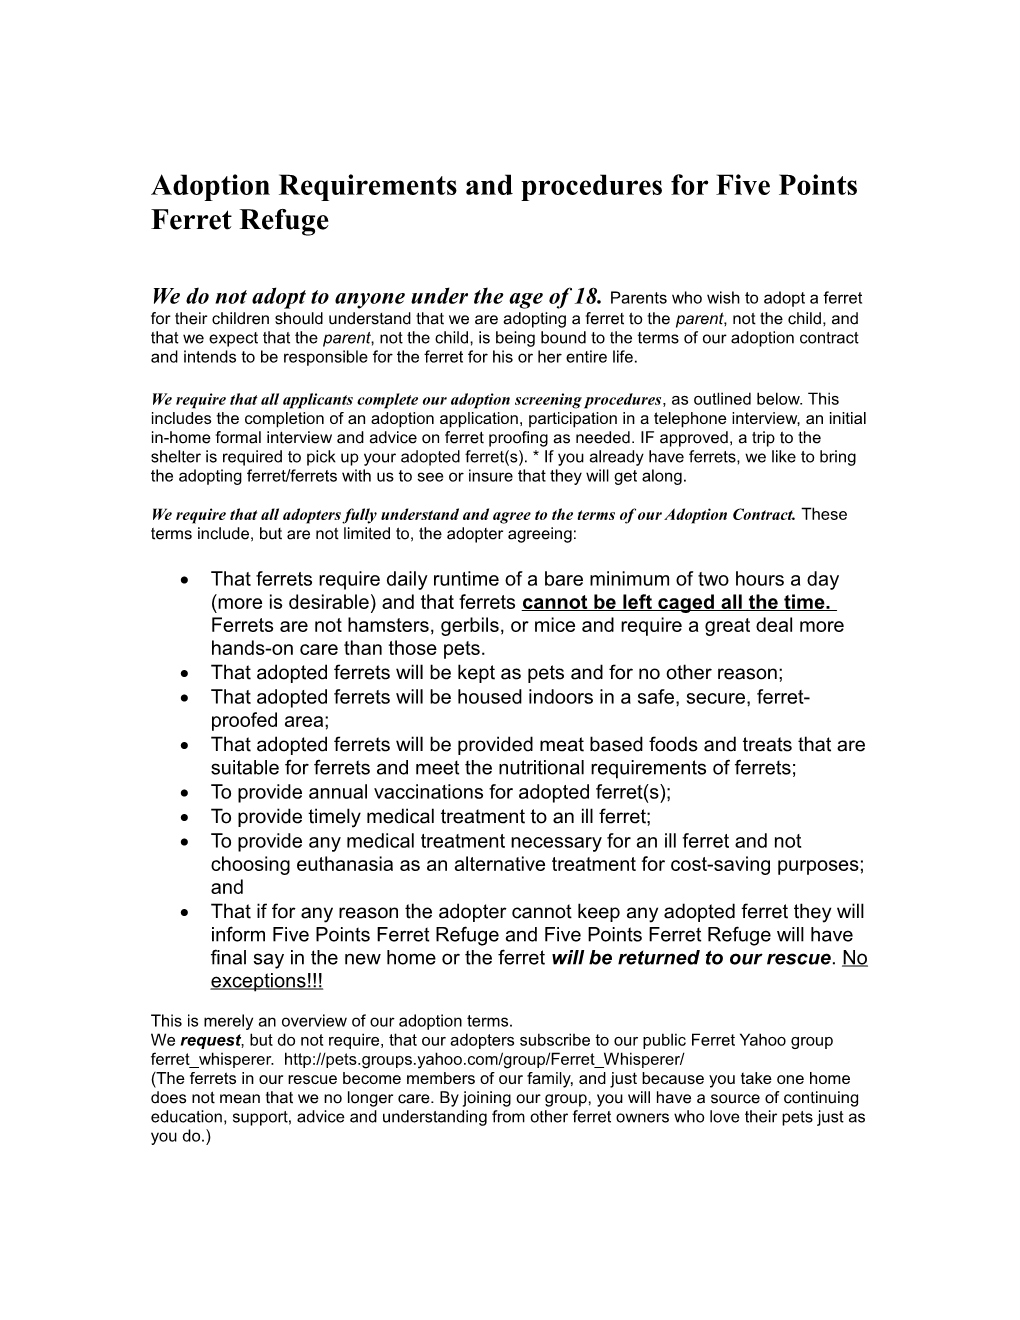 Adoption Requirements and Procedures for Five Points Ferret Refuge